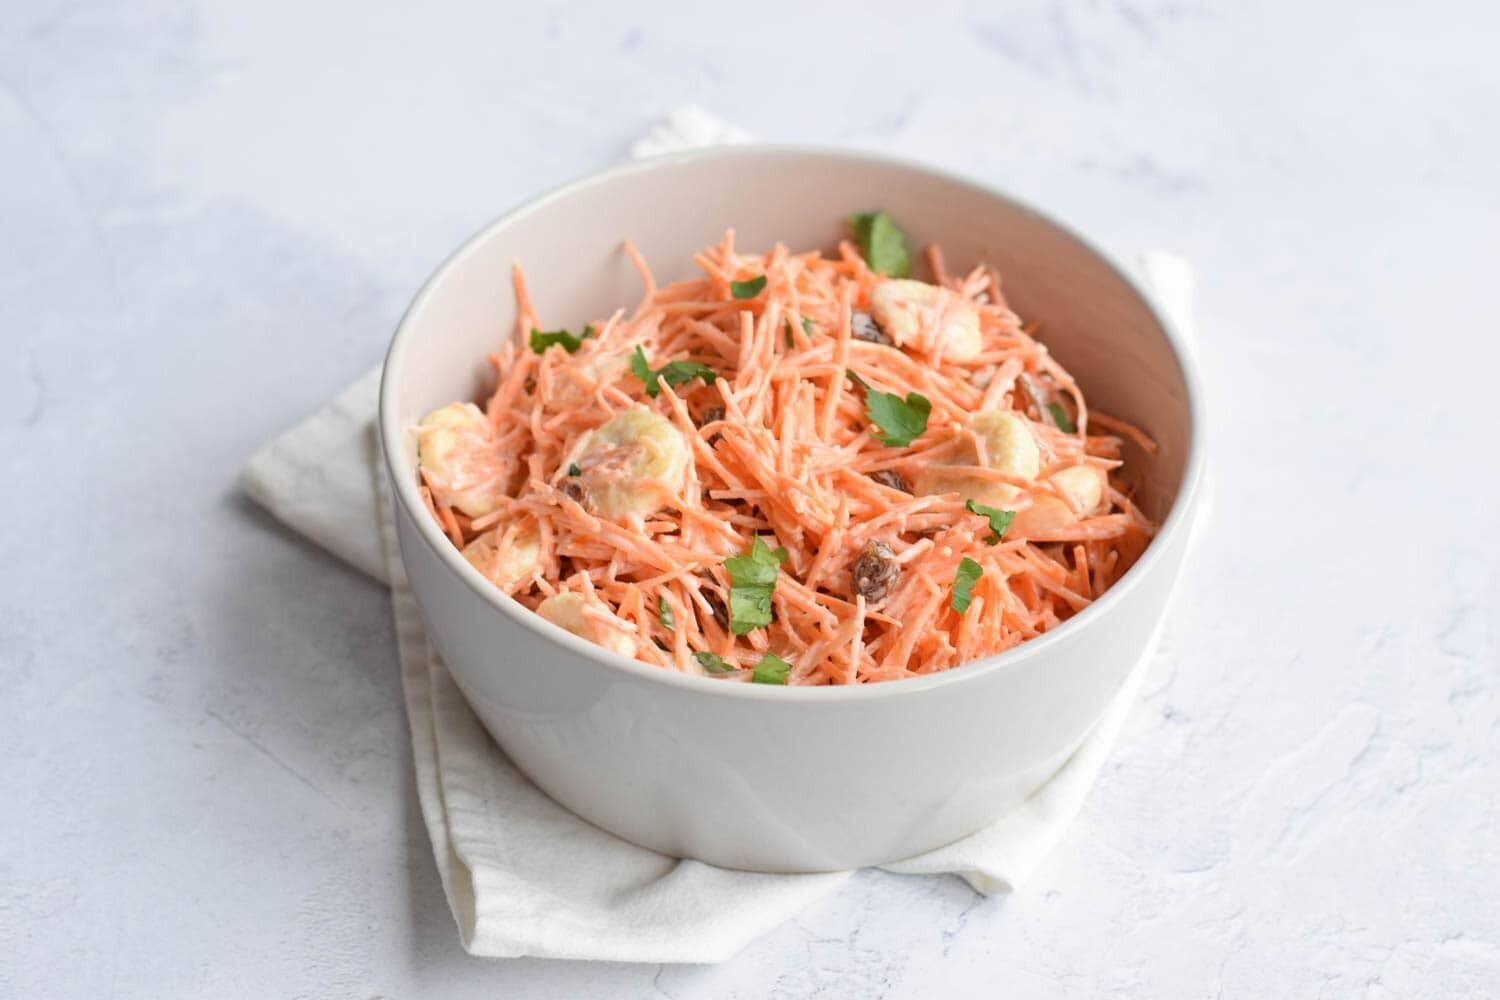 Delicious salad with carrots